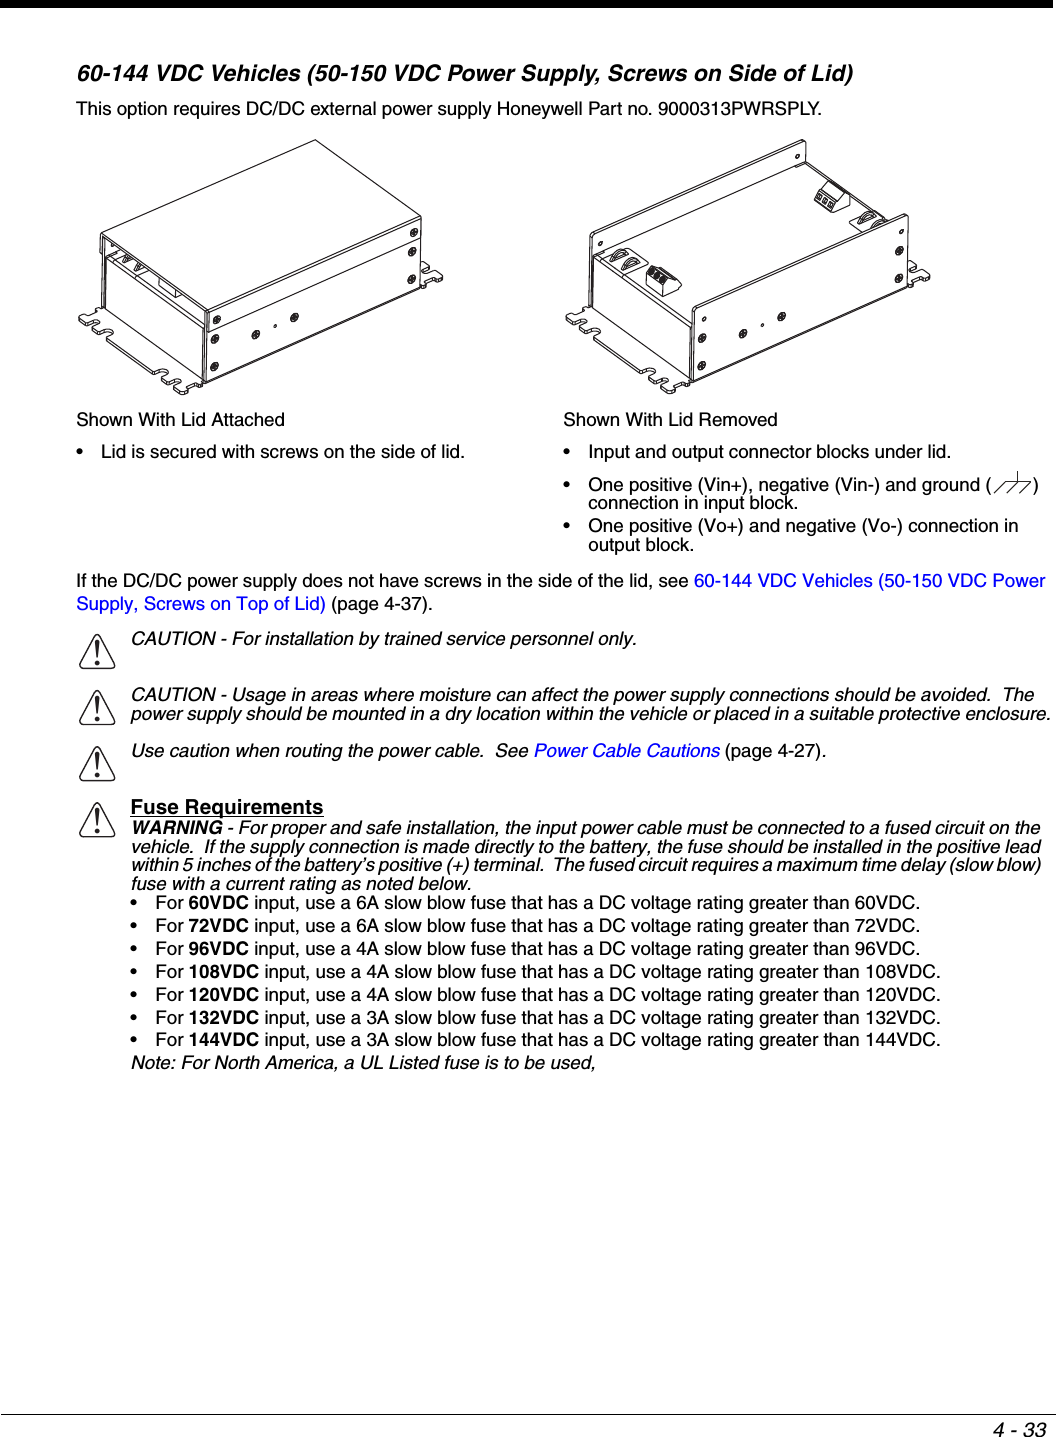 4 - 3360-144 VDC Vehicles (50-150 VDC Power Supply, Screws on Side of Lid)This option requires DC/DC external power supply Honeywell Part no. 9000313PWRSPLY.If the DC/DC power supply does not have screws in the side of the lid, see 60-144 VDC Vehicles (50-150 VDC Power Supply, Screws on Top of Lid) (page 4-37).Shown With Lid Attached• Lid is secured with screws on the side of lid.Shown With Lid Removed• Input and output connector blocks under lid.• One positive (Vin+), negative (Vin-) and ground ( ) connection in input block. • One positive (Vo+) and negative (Vo-) connection in output block.CAUTION - For installation by trained service personnel only.CAUTION - Usage in areas where moisture can affect the power supply connections should be avoided.  The power supply should be mounted in a dry location within the vehicle or placed in a suitable protective enclosure.Use caution when routing the power cable.  See Power Cable Cautions (page 4-27).Fuse RequirementsWARNING - For proper and safe installation, the input power cable must be connected to a fused circuit on the vehicle.  If the supply connection is made directly to the battery, the fuse should be installed in the positive lead within 5 inches of the battery’s positive (+) terminal.  The fused circuit requires a maximum time delay (slow blow) fuse with a current rating as noted below.•For 60VDC input, use a 6A slow blow fuse that has a DC voltage rating greater than 60VDC.•For 72VDC input, use a 6A slow blow fuse that has a DC voltage rating greater than 72VDC.•For 96VDC input, use a 4A slow blow fuse that has a DC voltage rating greater than 96VDC.•For 108VDC input, use a 4A slow blow fuse that has a DC voltage rating greater than 108VDC.•For 120VDC input, use a 4A slow blow fuse that has a DC voltage rating greater than 120VDC.•For 132VDC input, use a 3A slow blow fuse that has a DC voltage rating greater than 132VDC.•For 144VDC input, use a 3A slow blow fuse that has a DC voltage rating greater than 144VDC.Note: For North America, a UL Listed fuse is to be used,!!!!